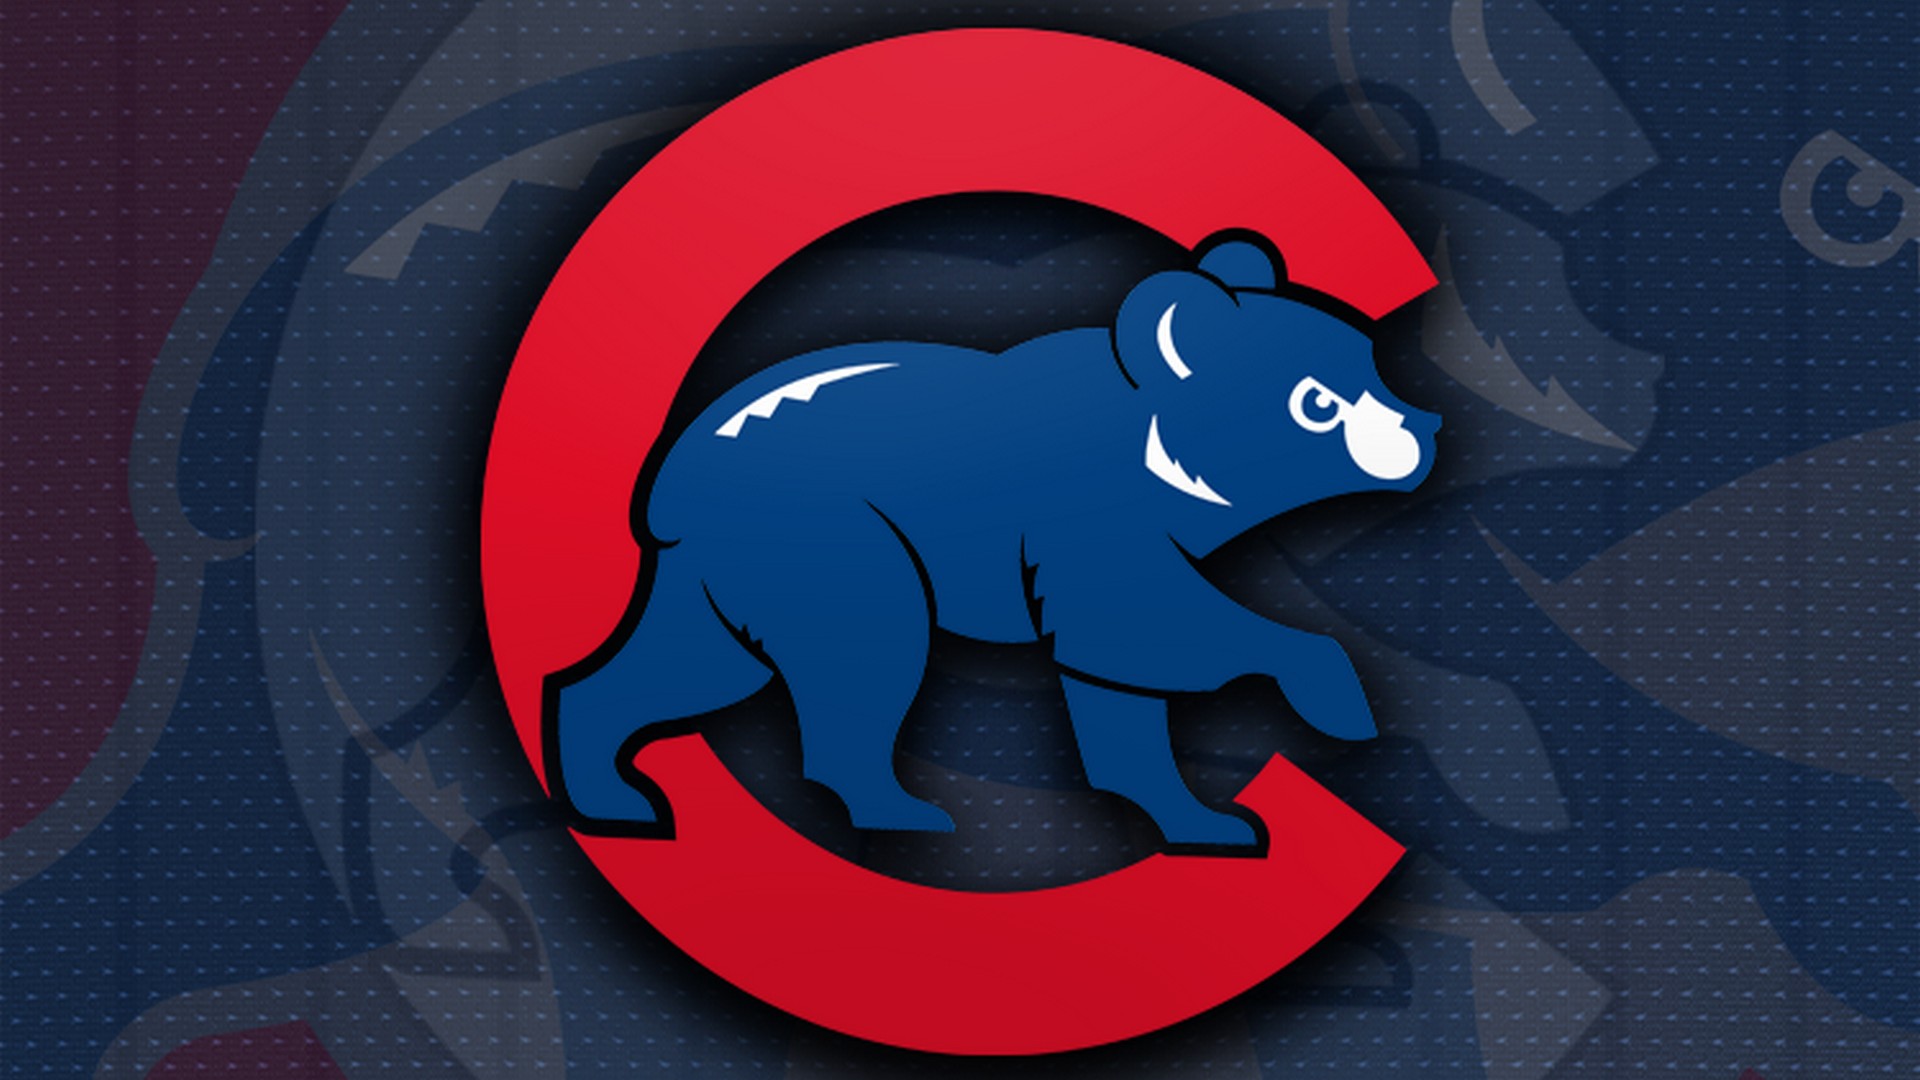 Chicago Cubs For Desktop Wallpaper with high-resolution 1920x1080 pixel. You can use this wallpaper for Mac Desktop Wallpaper, Laptop Screensavers, Android Wallpapers, Tablet or iPhone Home Screen and another mobile phone device